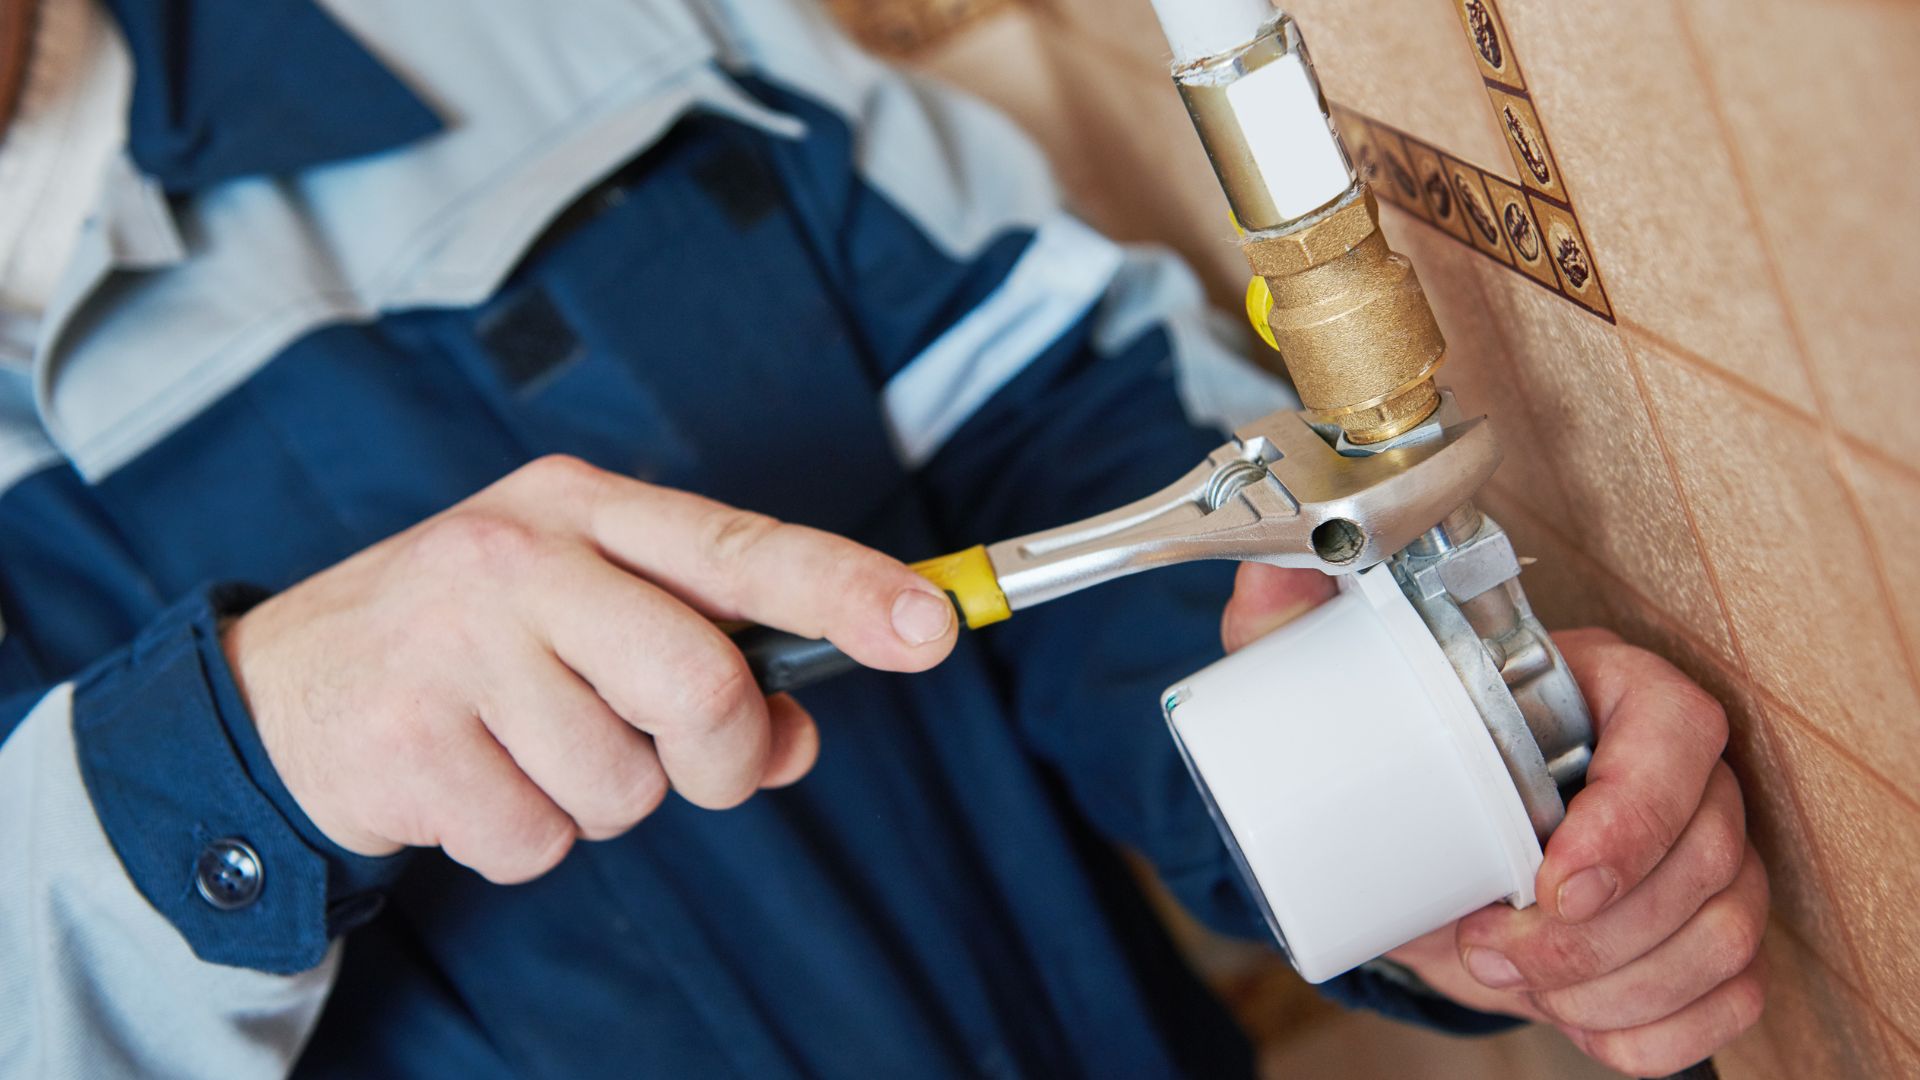 Examine plumbing fixtures with the expertise of plumbers.